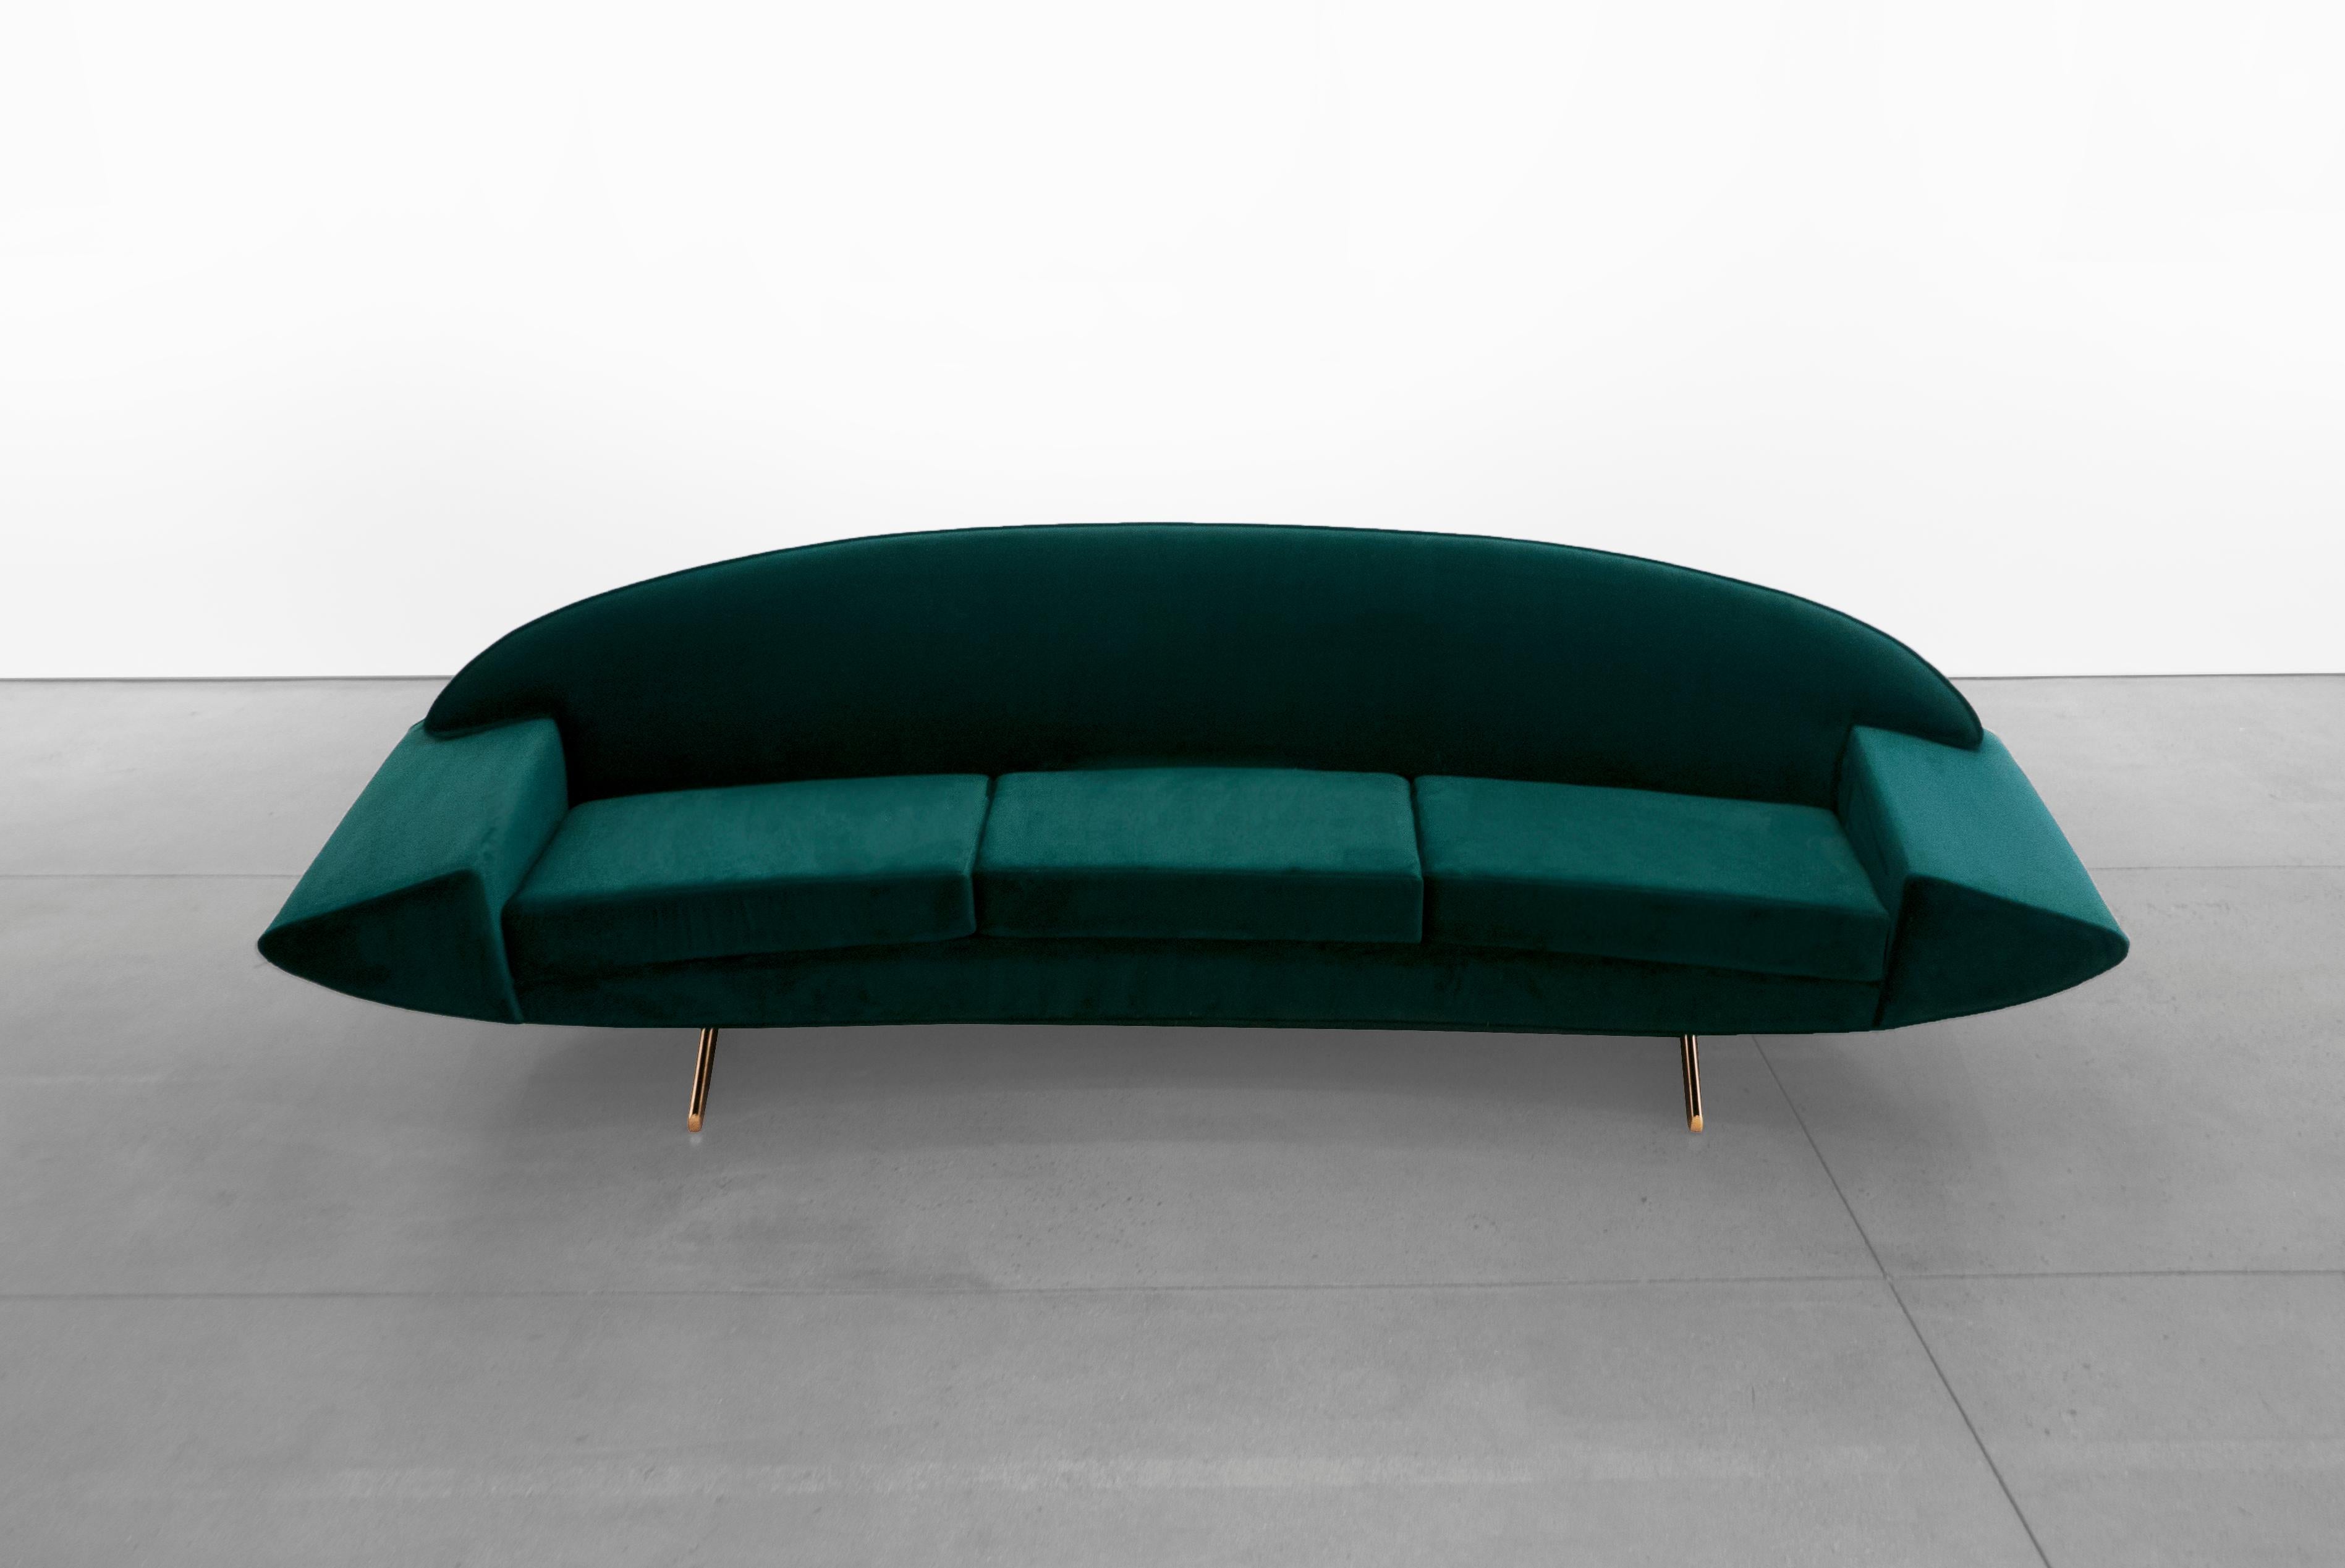 Boomerang shaped meticulously upholstered 'Capri' sofa with Dedar Milano velvet on a gold-plated T-legged frame, designed by Johannes Andersen in the 1950's. 

Johannes Andersen (Danish, 1903–1995) apprenticed as a cabinet maker, becoming certified